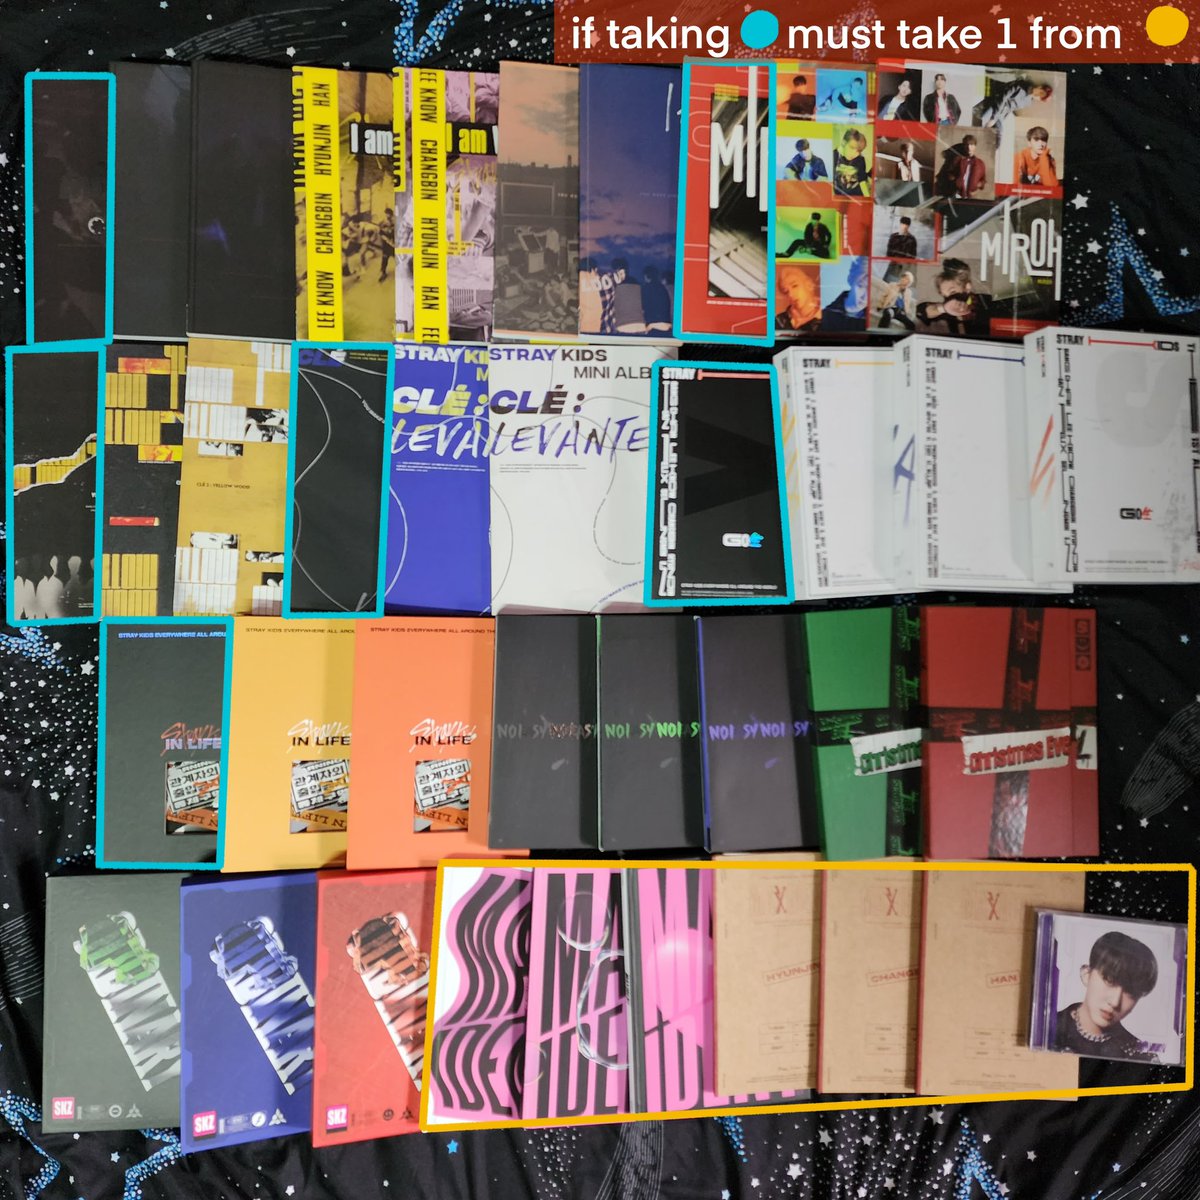 wts lfb ph ww

stray kids unsealed album
decluttering sale! ❤️
— see thread for prices!

— can tingi but prio set takers/taking more
— PAYO/3 days res

dm/reply to claim! 

t. skz mixtape i am not who you miroh yellow wood levanter go live in life noeasy maxident oddinary limited